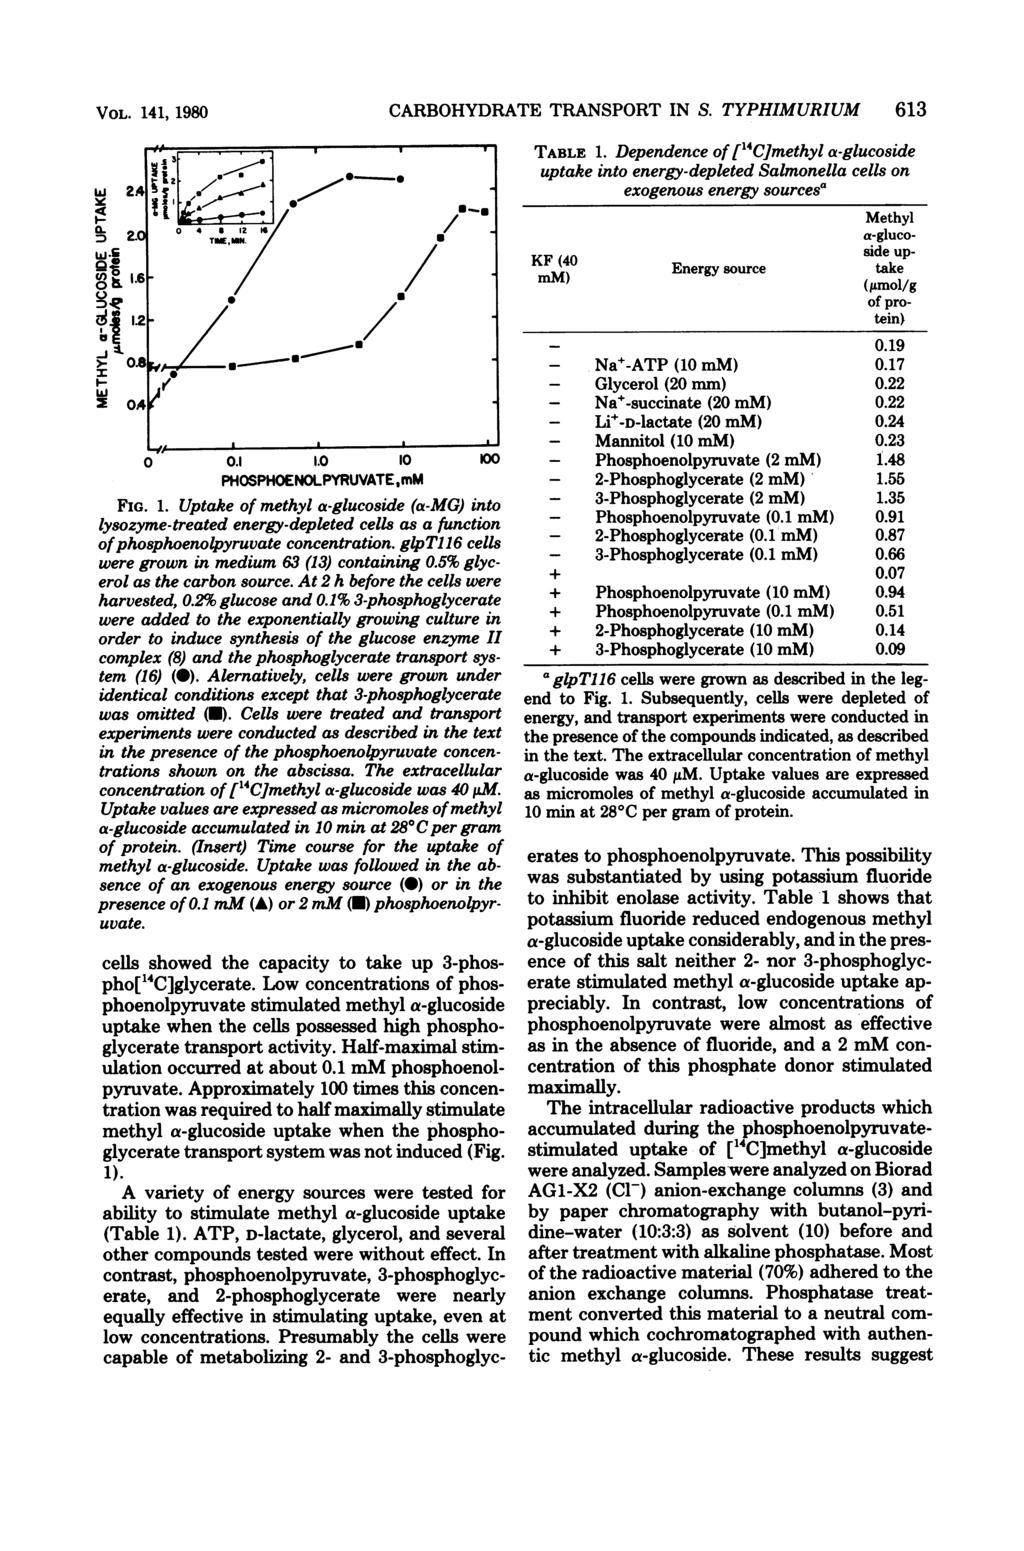 VOL. 141, 1980 0 0.1 1.0 10 100 PHOSPHOENOLPYRUVATE,mM FIG. 1. Uptake of methyl a-glucoside (a-mg) into lysozyme-treated energy-depleted cells as a function ofphosphoenolpyruvate concentration.